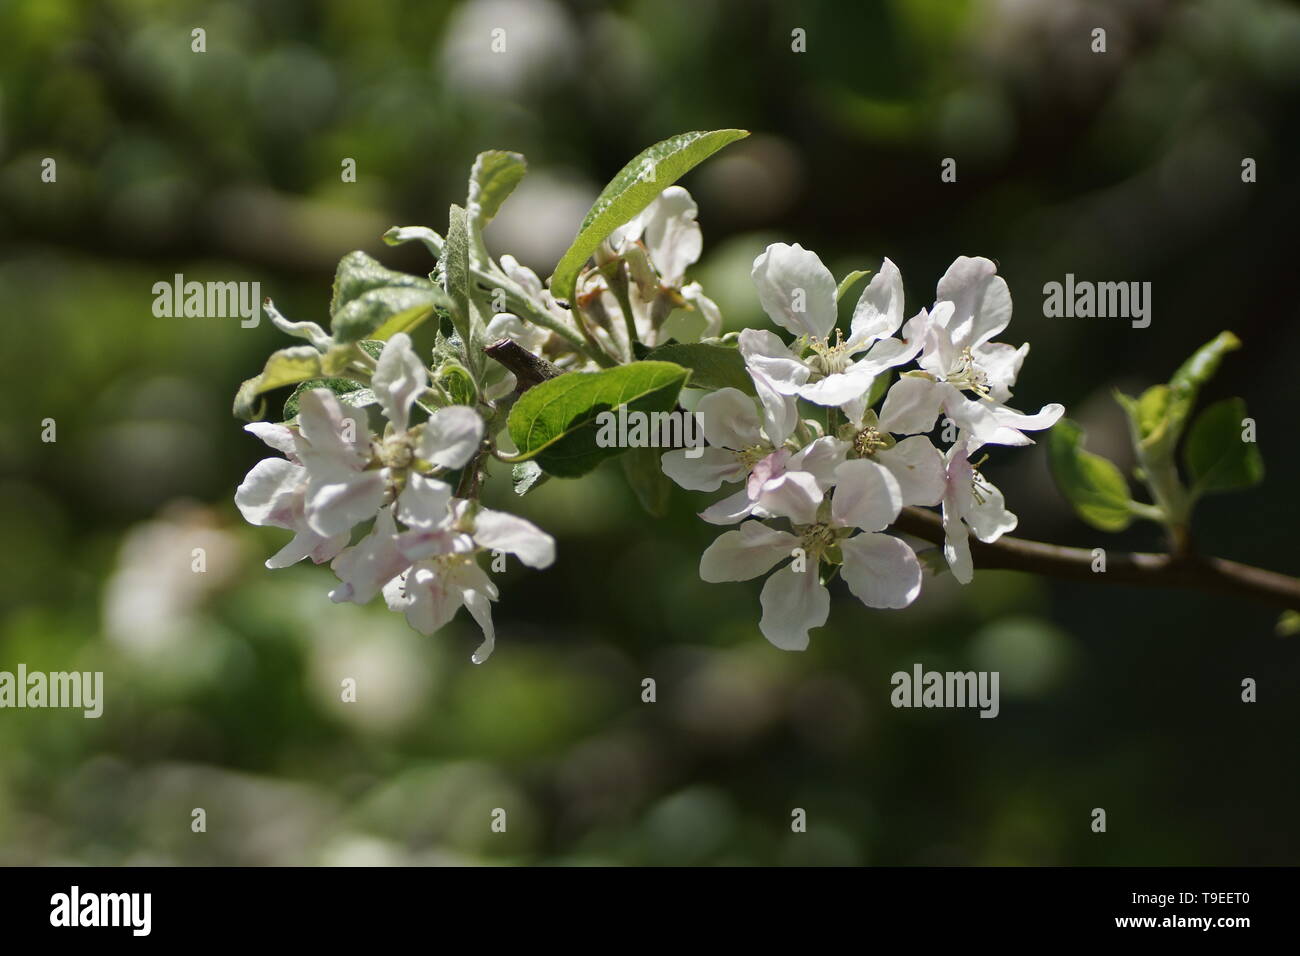 Malus domestica 'Brithmawr' at Clyne gardens, Swansea, Wales, UK. Stock Photo